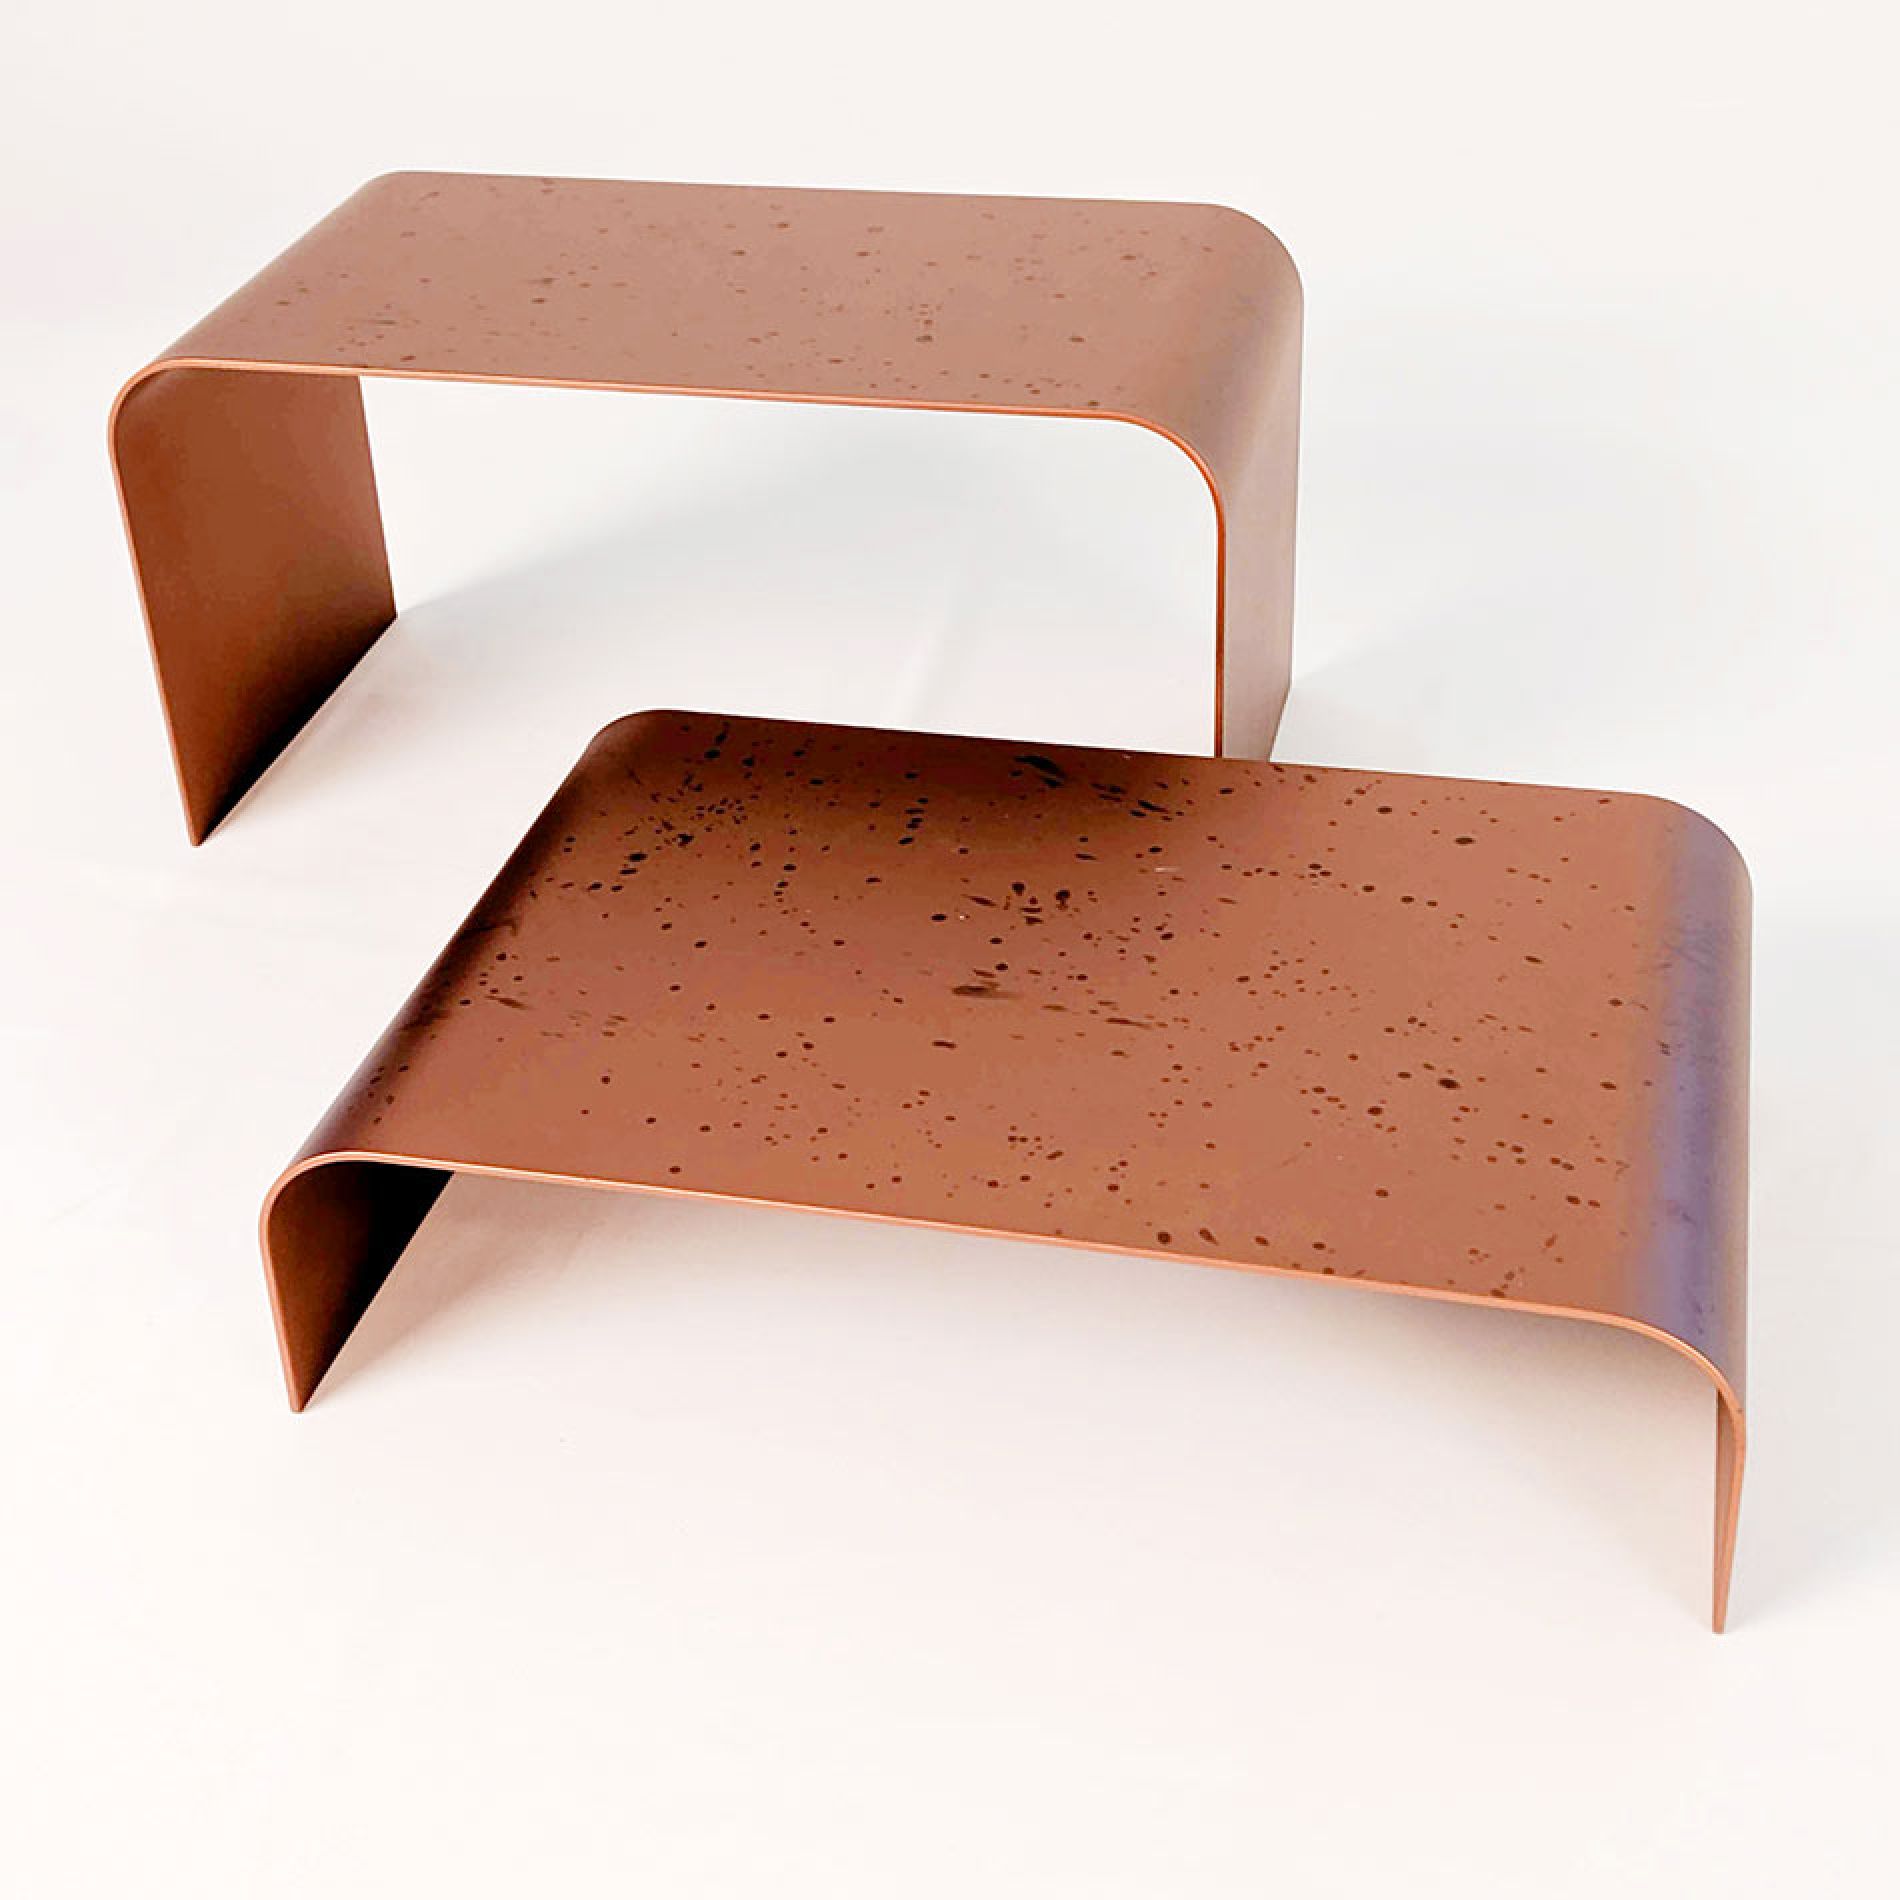 TABLE SYSTEMS - FLAT PACK Gallery Image